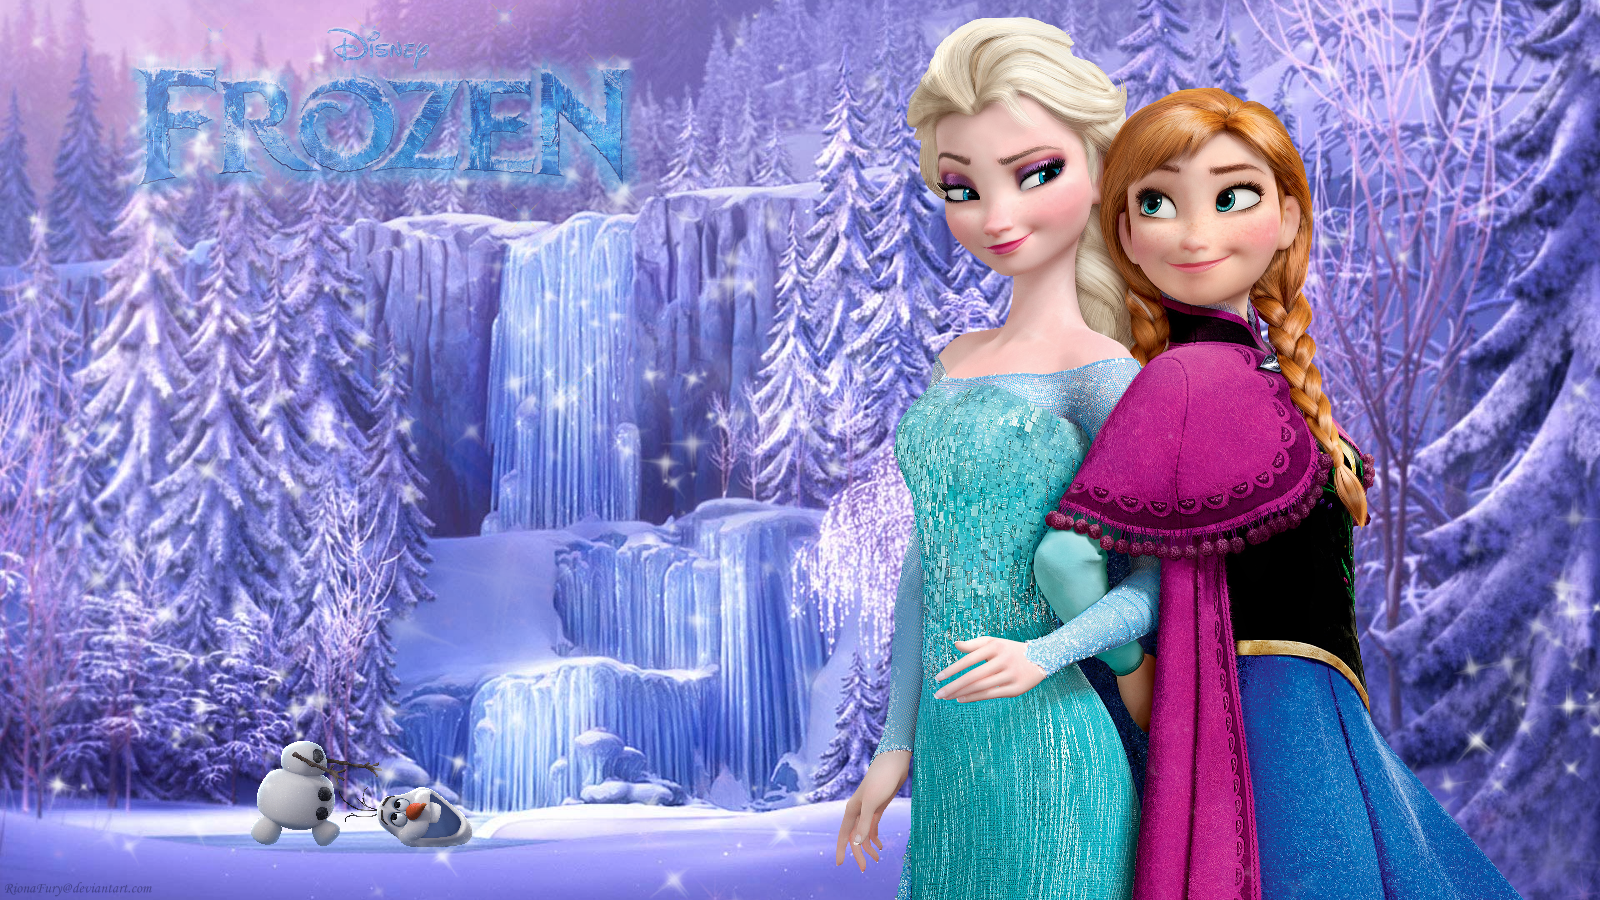 Frozen Images Frozen Sisters Hd Wallpaper And Background HD Wallpapers Download Free Images Wallpaper [wallpaper981.blogspot.com]